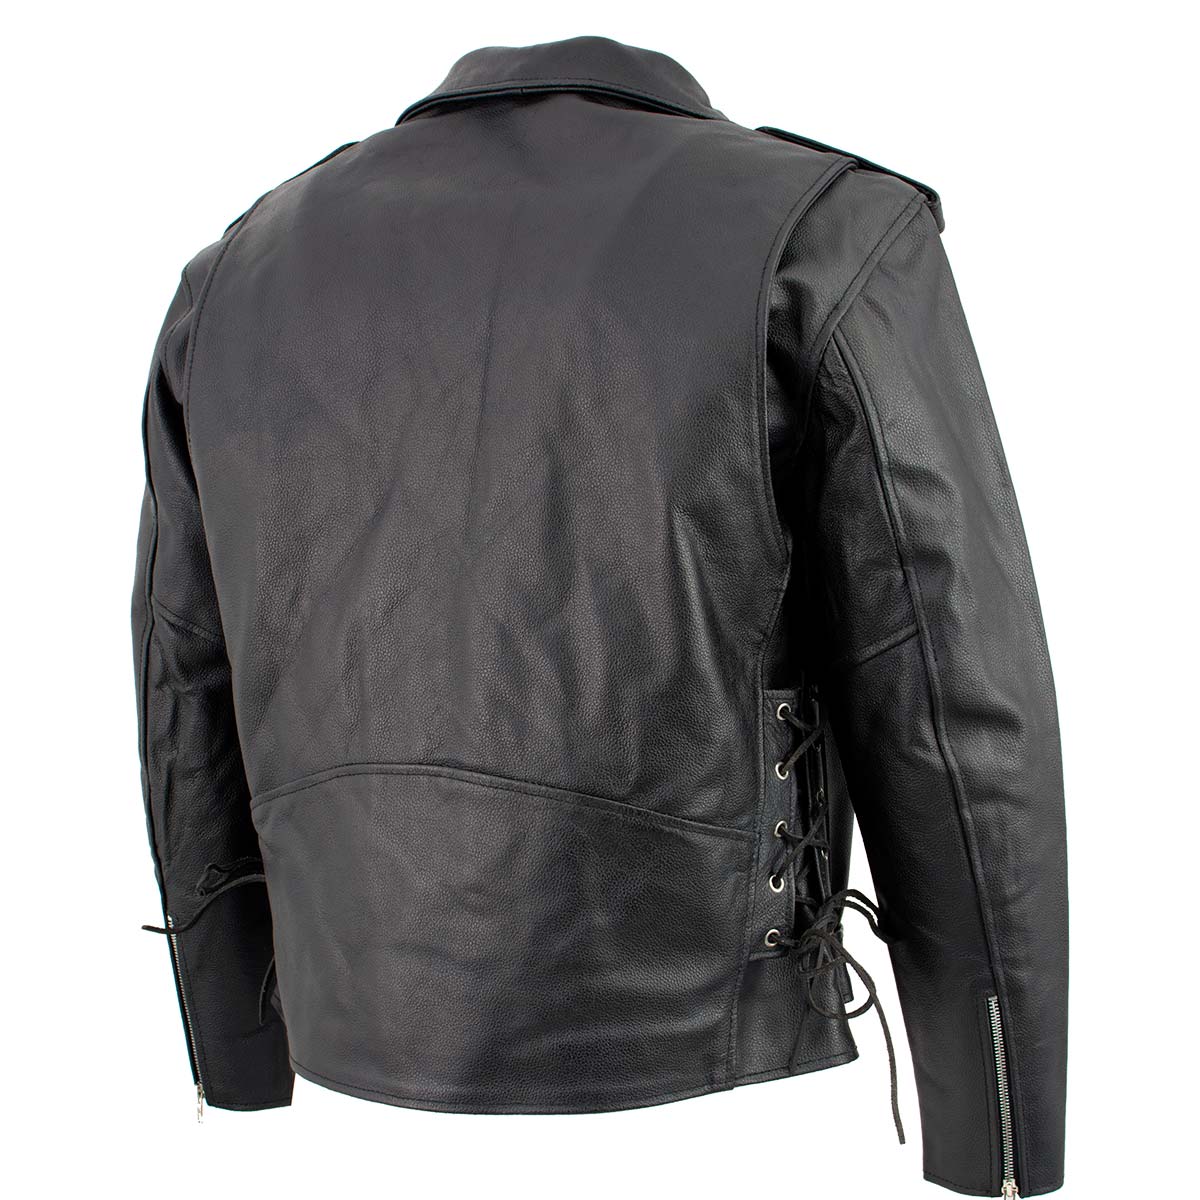 Men's XS400T Tall Size Black Classic Side Lace Police Style Motorcycle Jacket